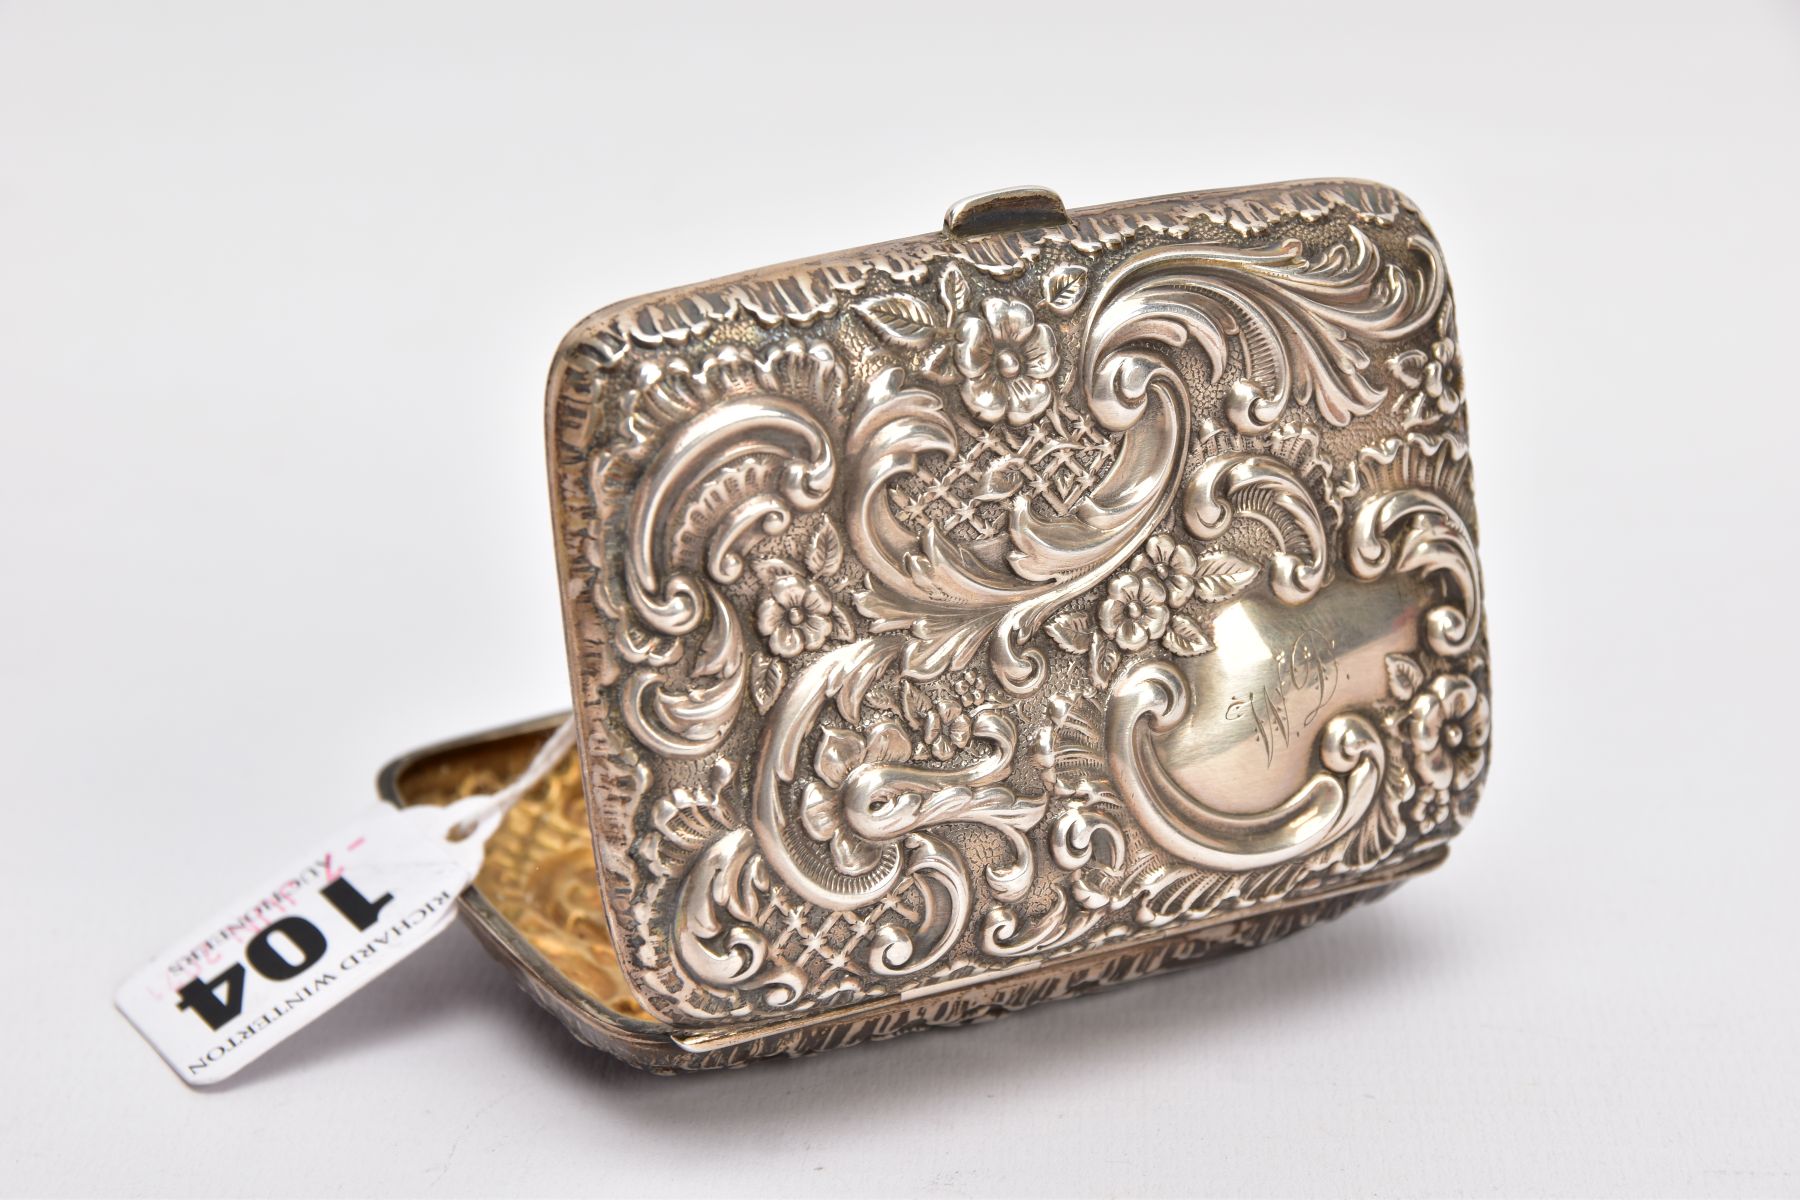 A LATE VICTORIAN, SILVER EMBOSSED CIGARETTE CASE, floral and foliate embossed design, engraved - Image 3 of 3